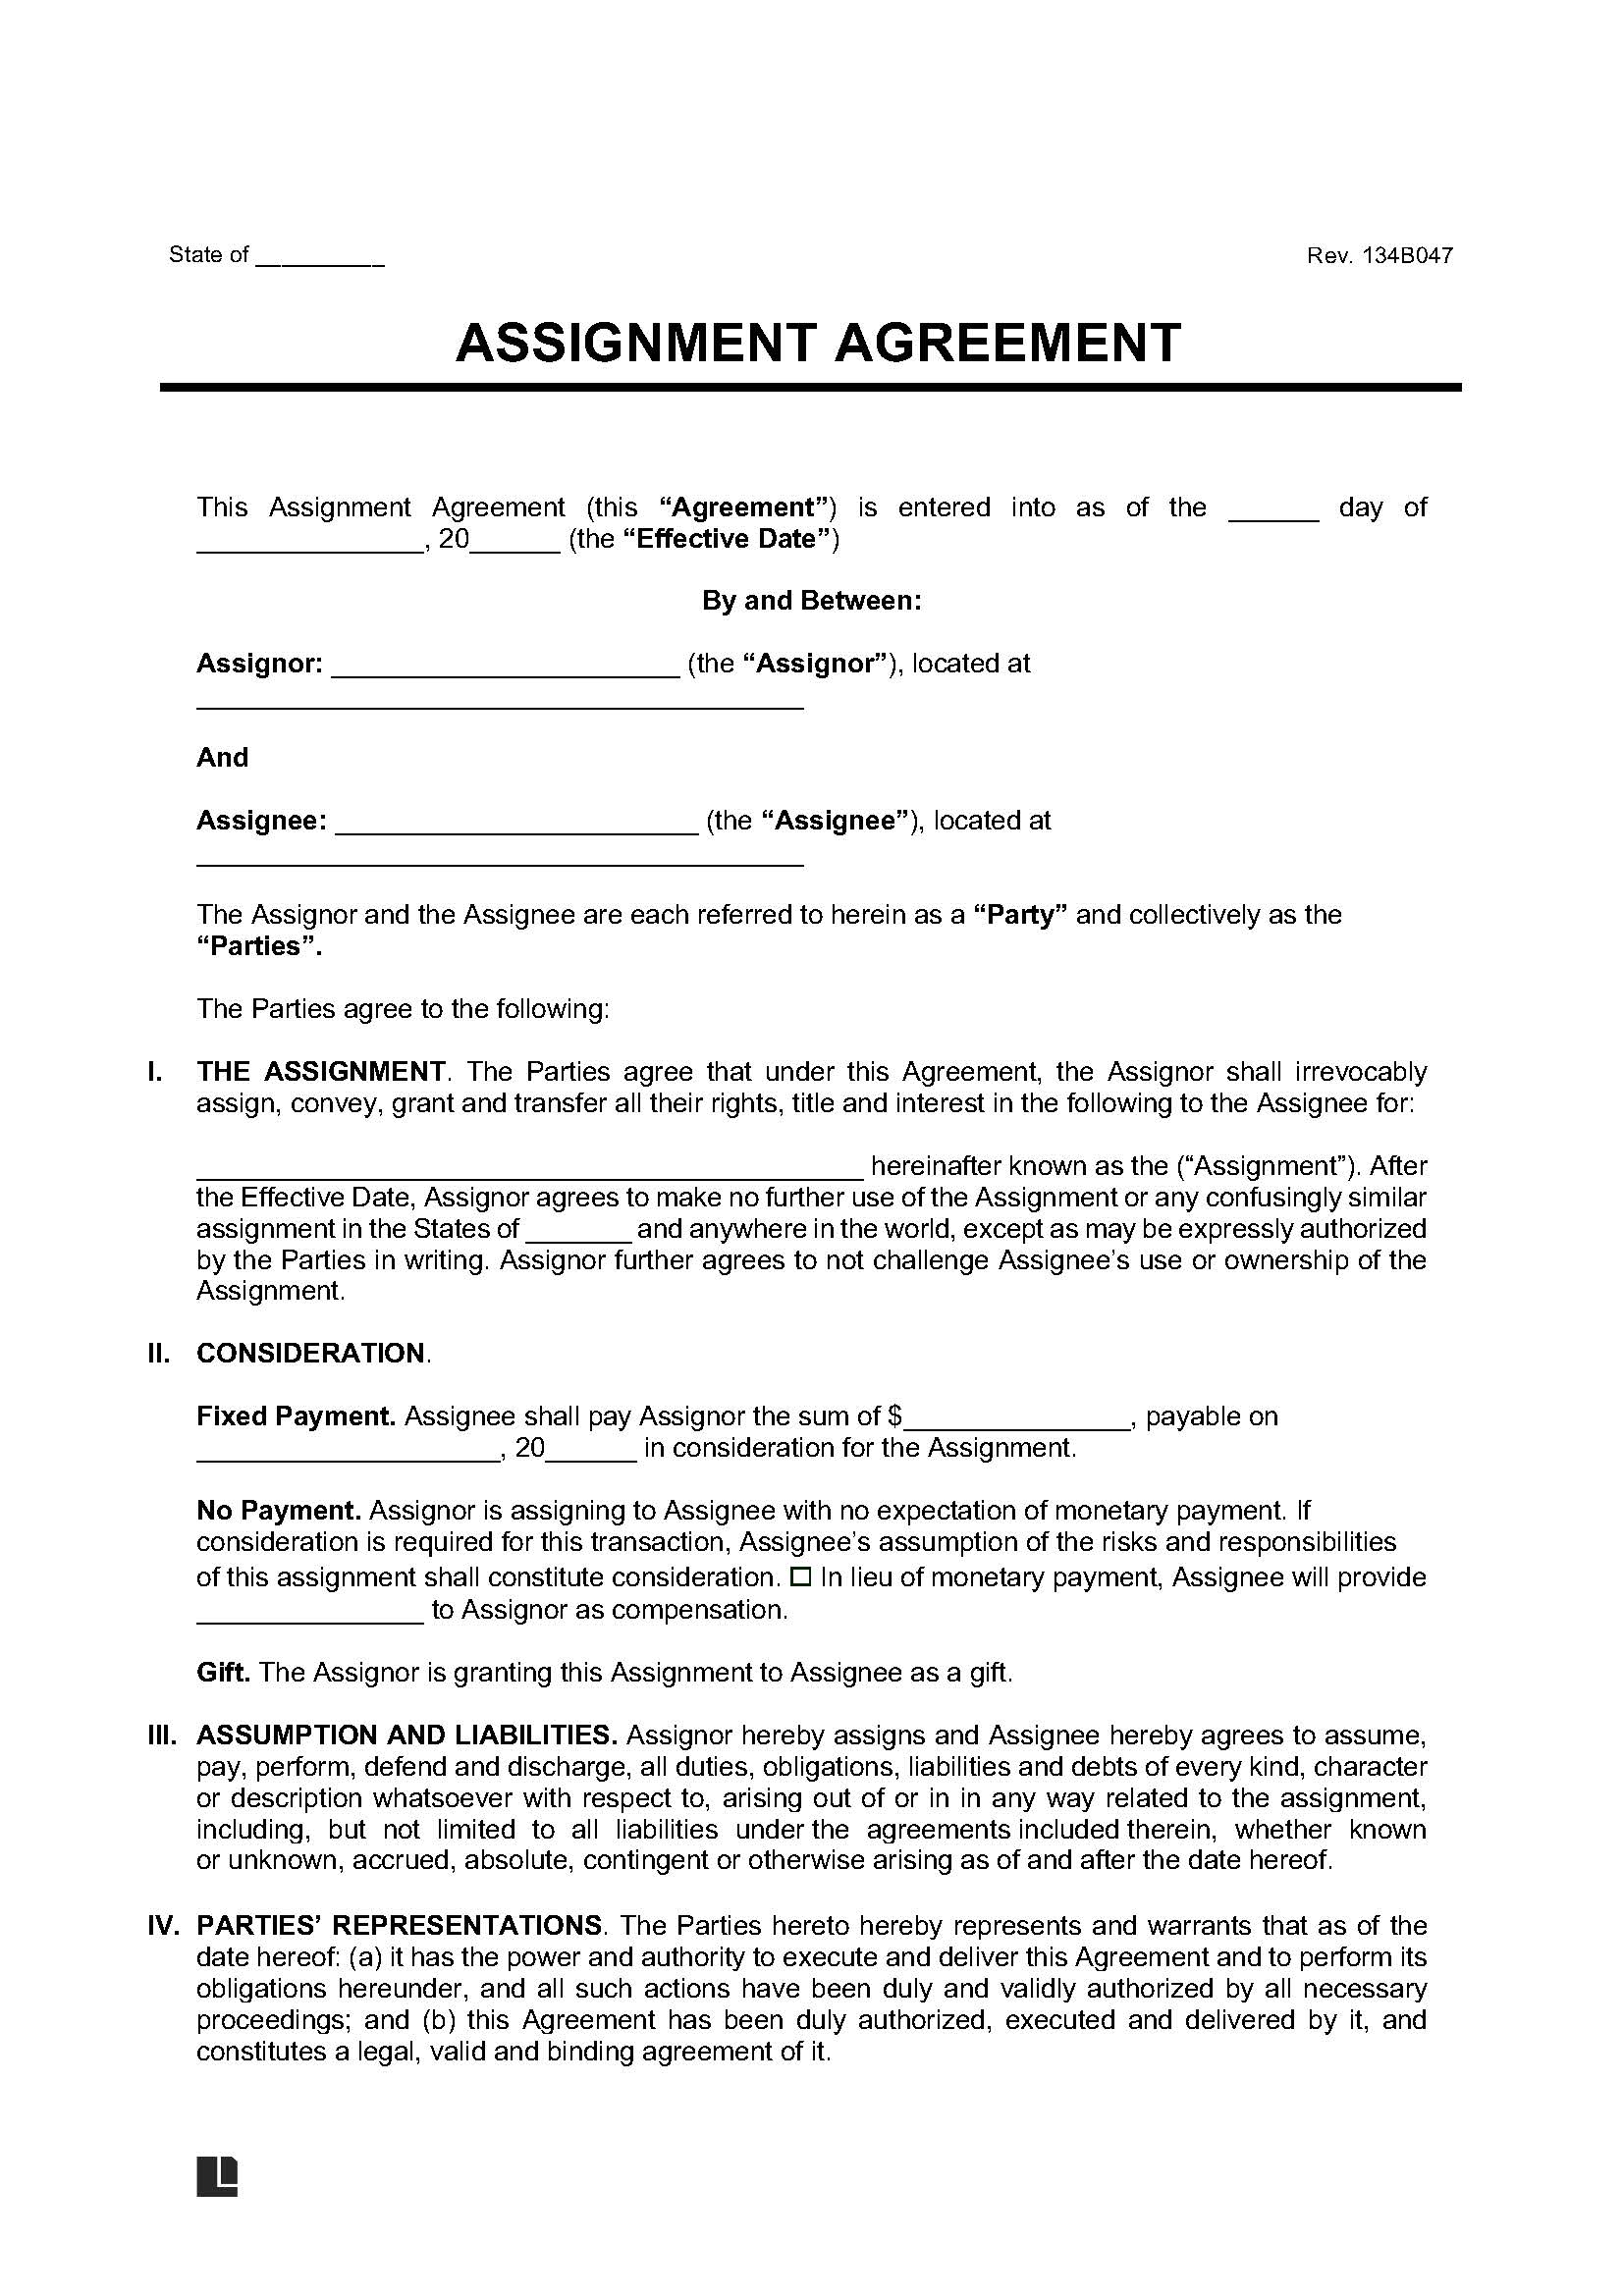 assignment agreement law insider